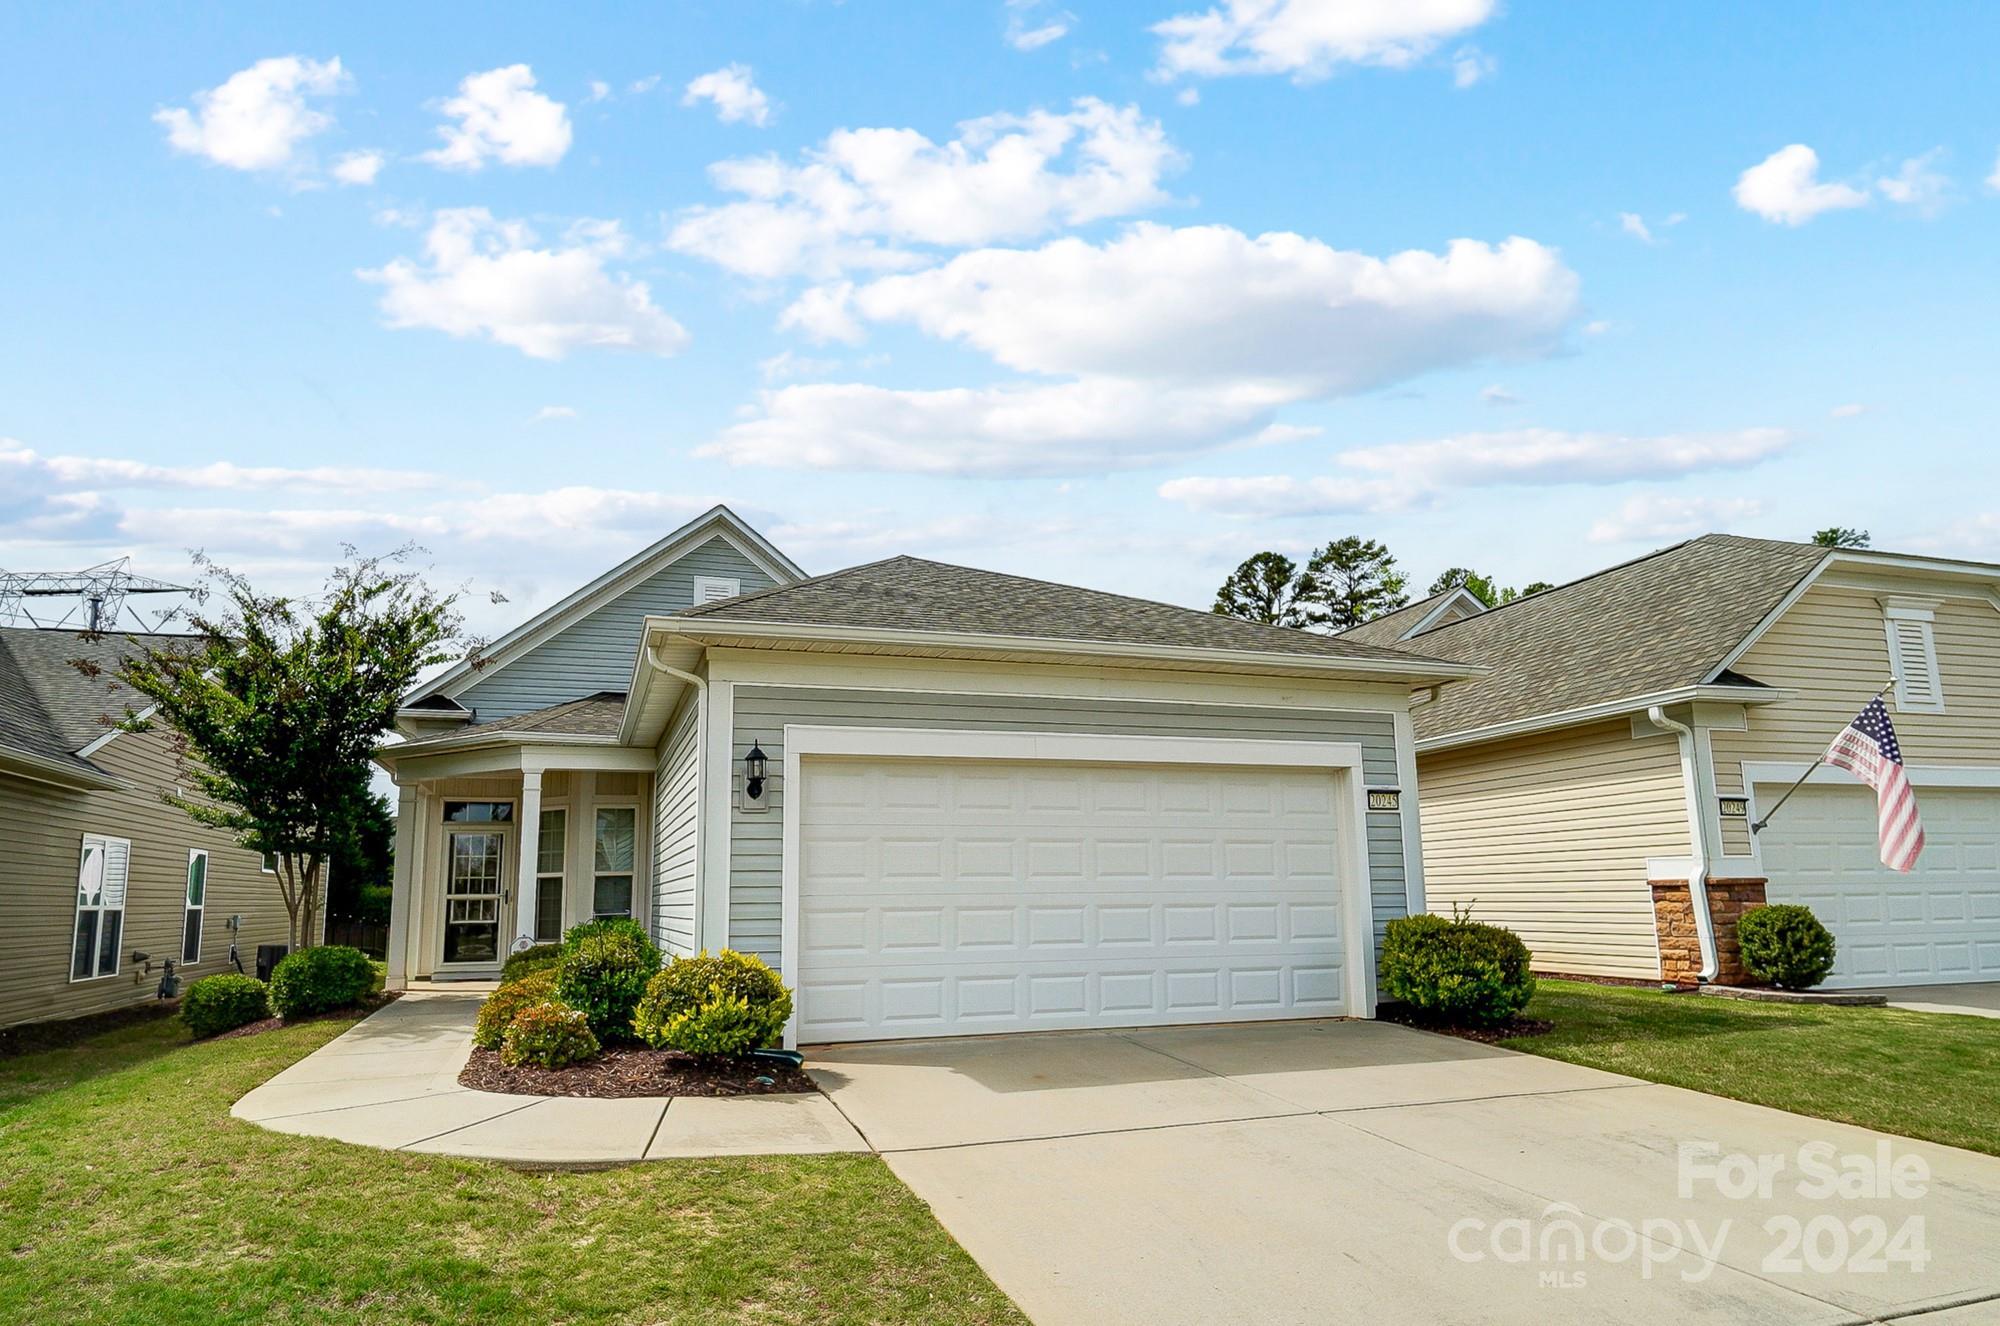 Photo one of 20245 Dovekie Ln Fort Mill SC 29707 | MLS 4129432